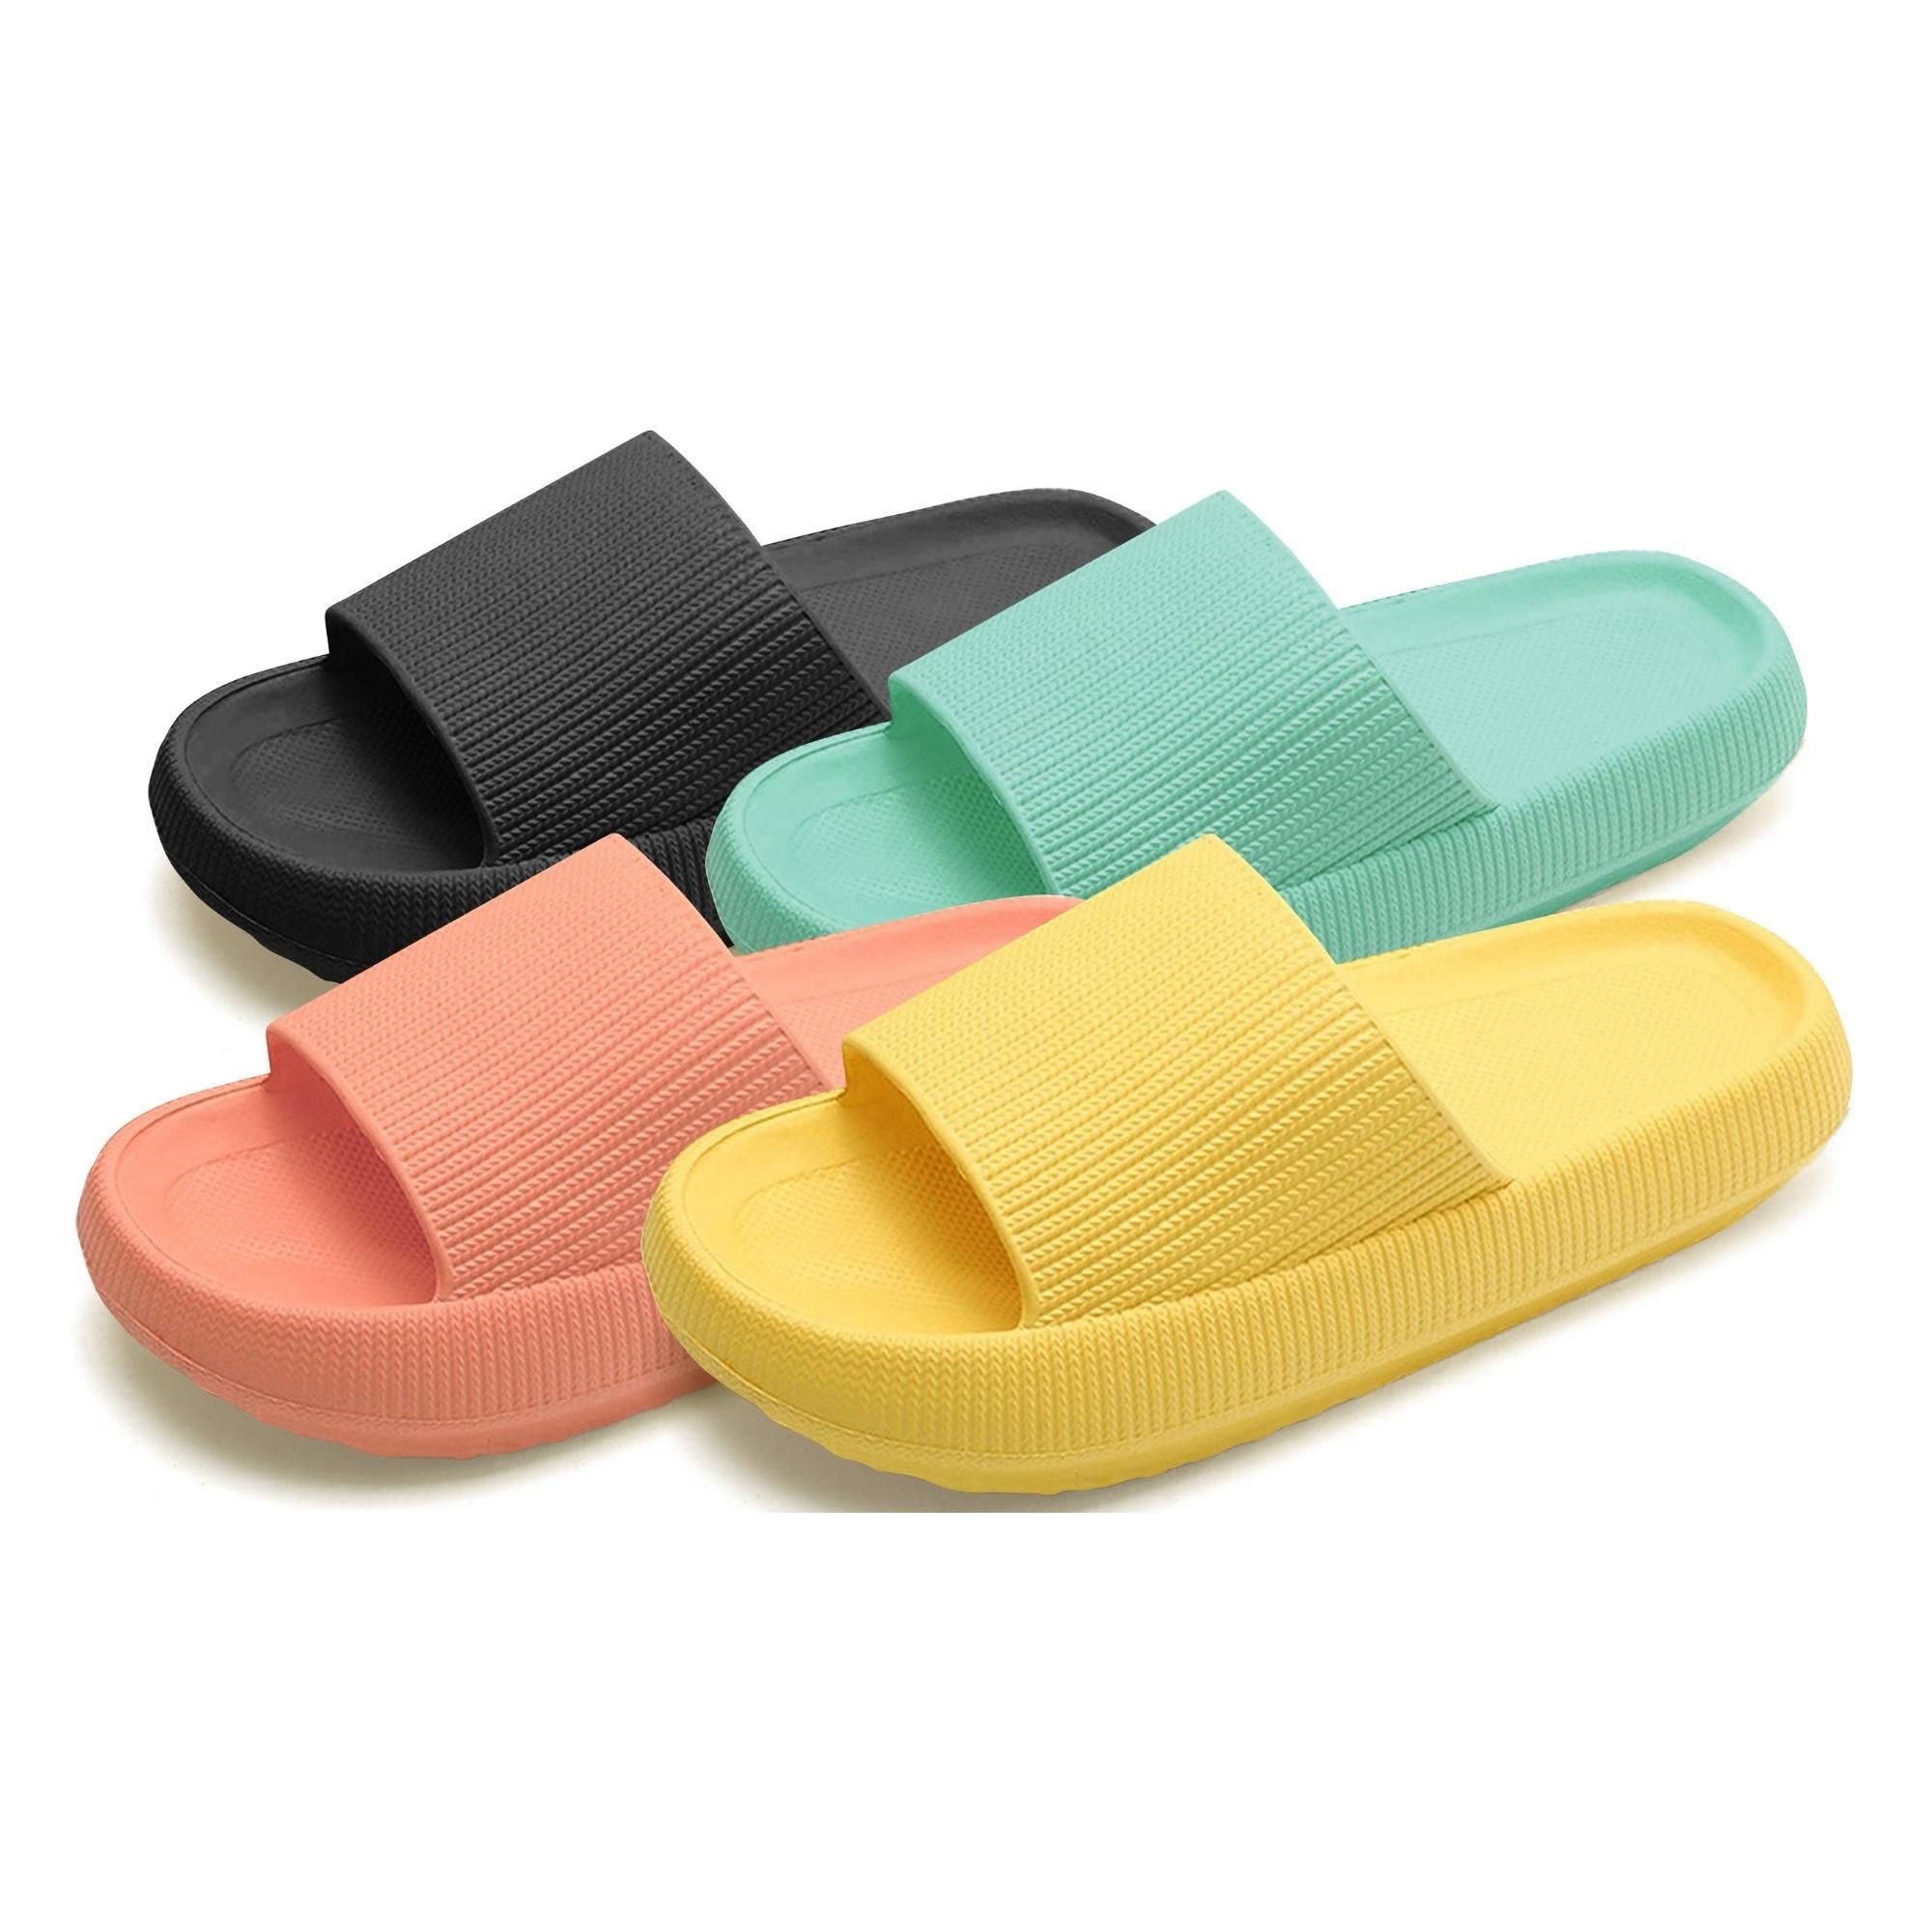 Comfy Non-Slip Cushioned Thick Sole Slippers for Indoor and Outdoor